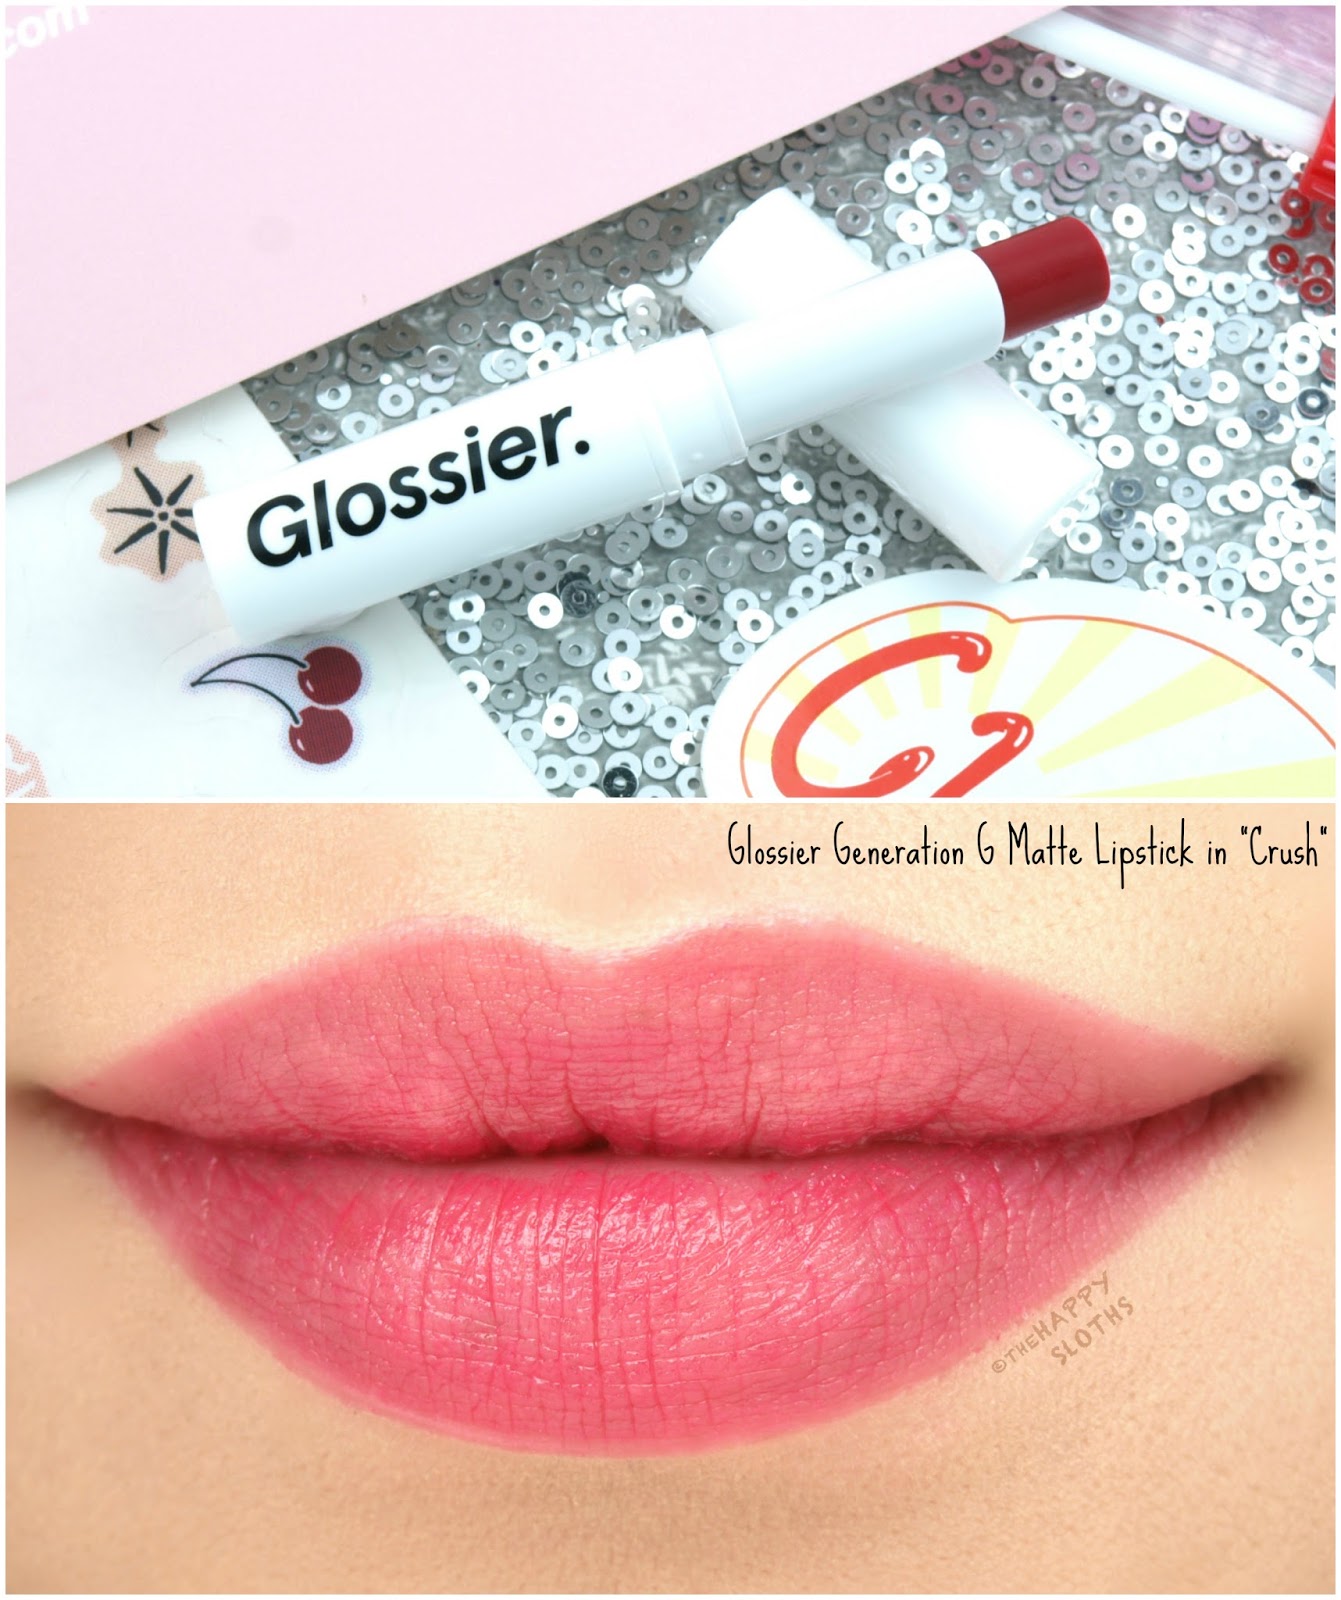 Glossier Generation G Sheer Matte Lipstick in "Crush": Review and Swatches